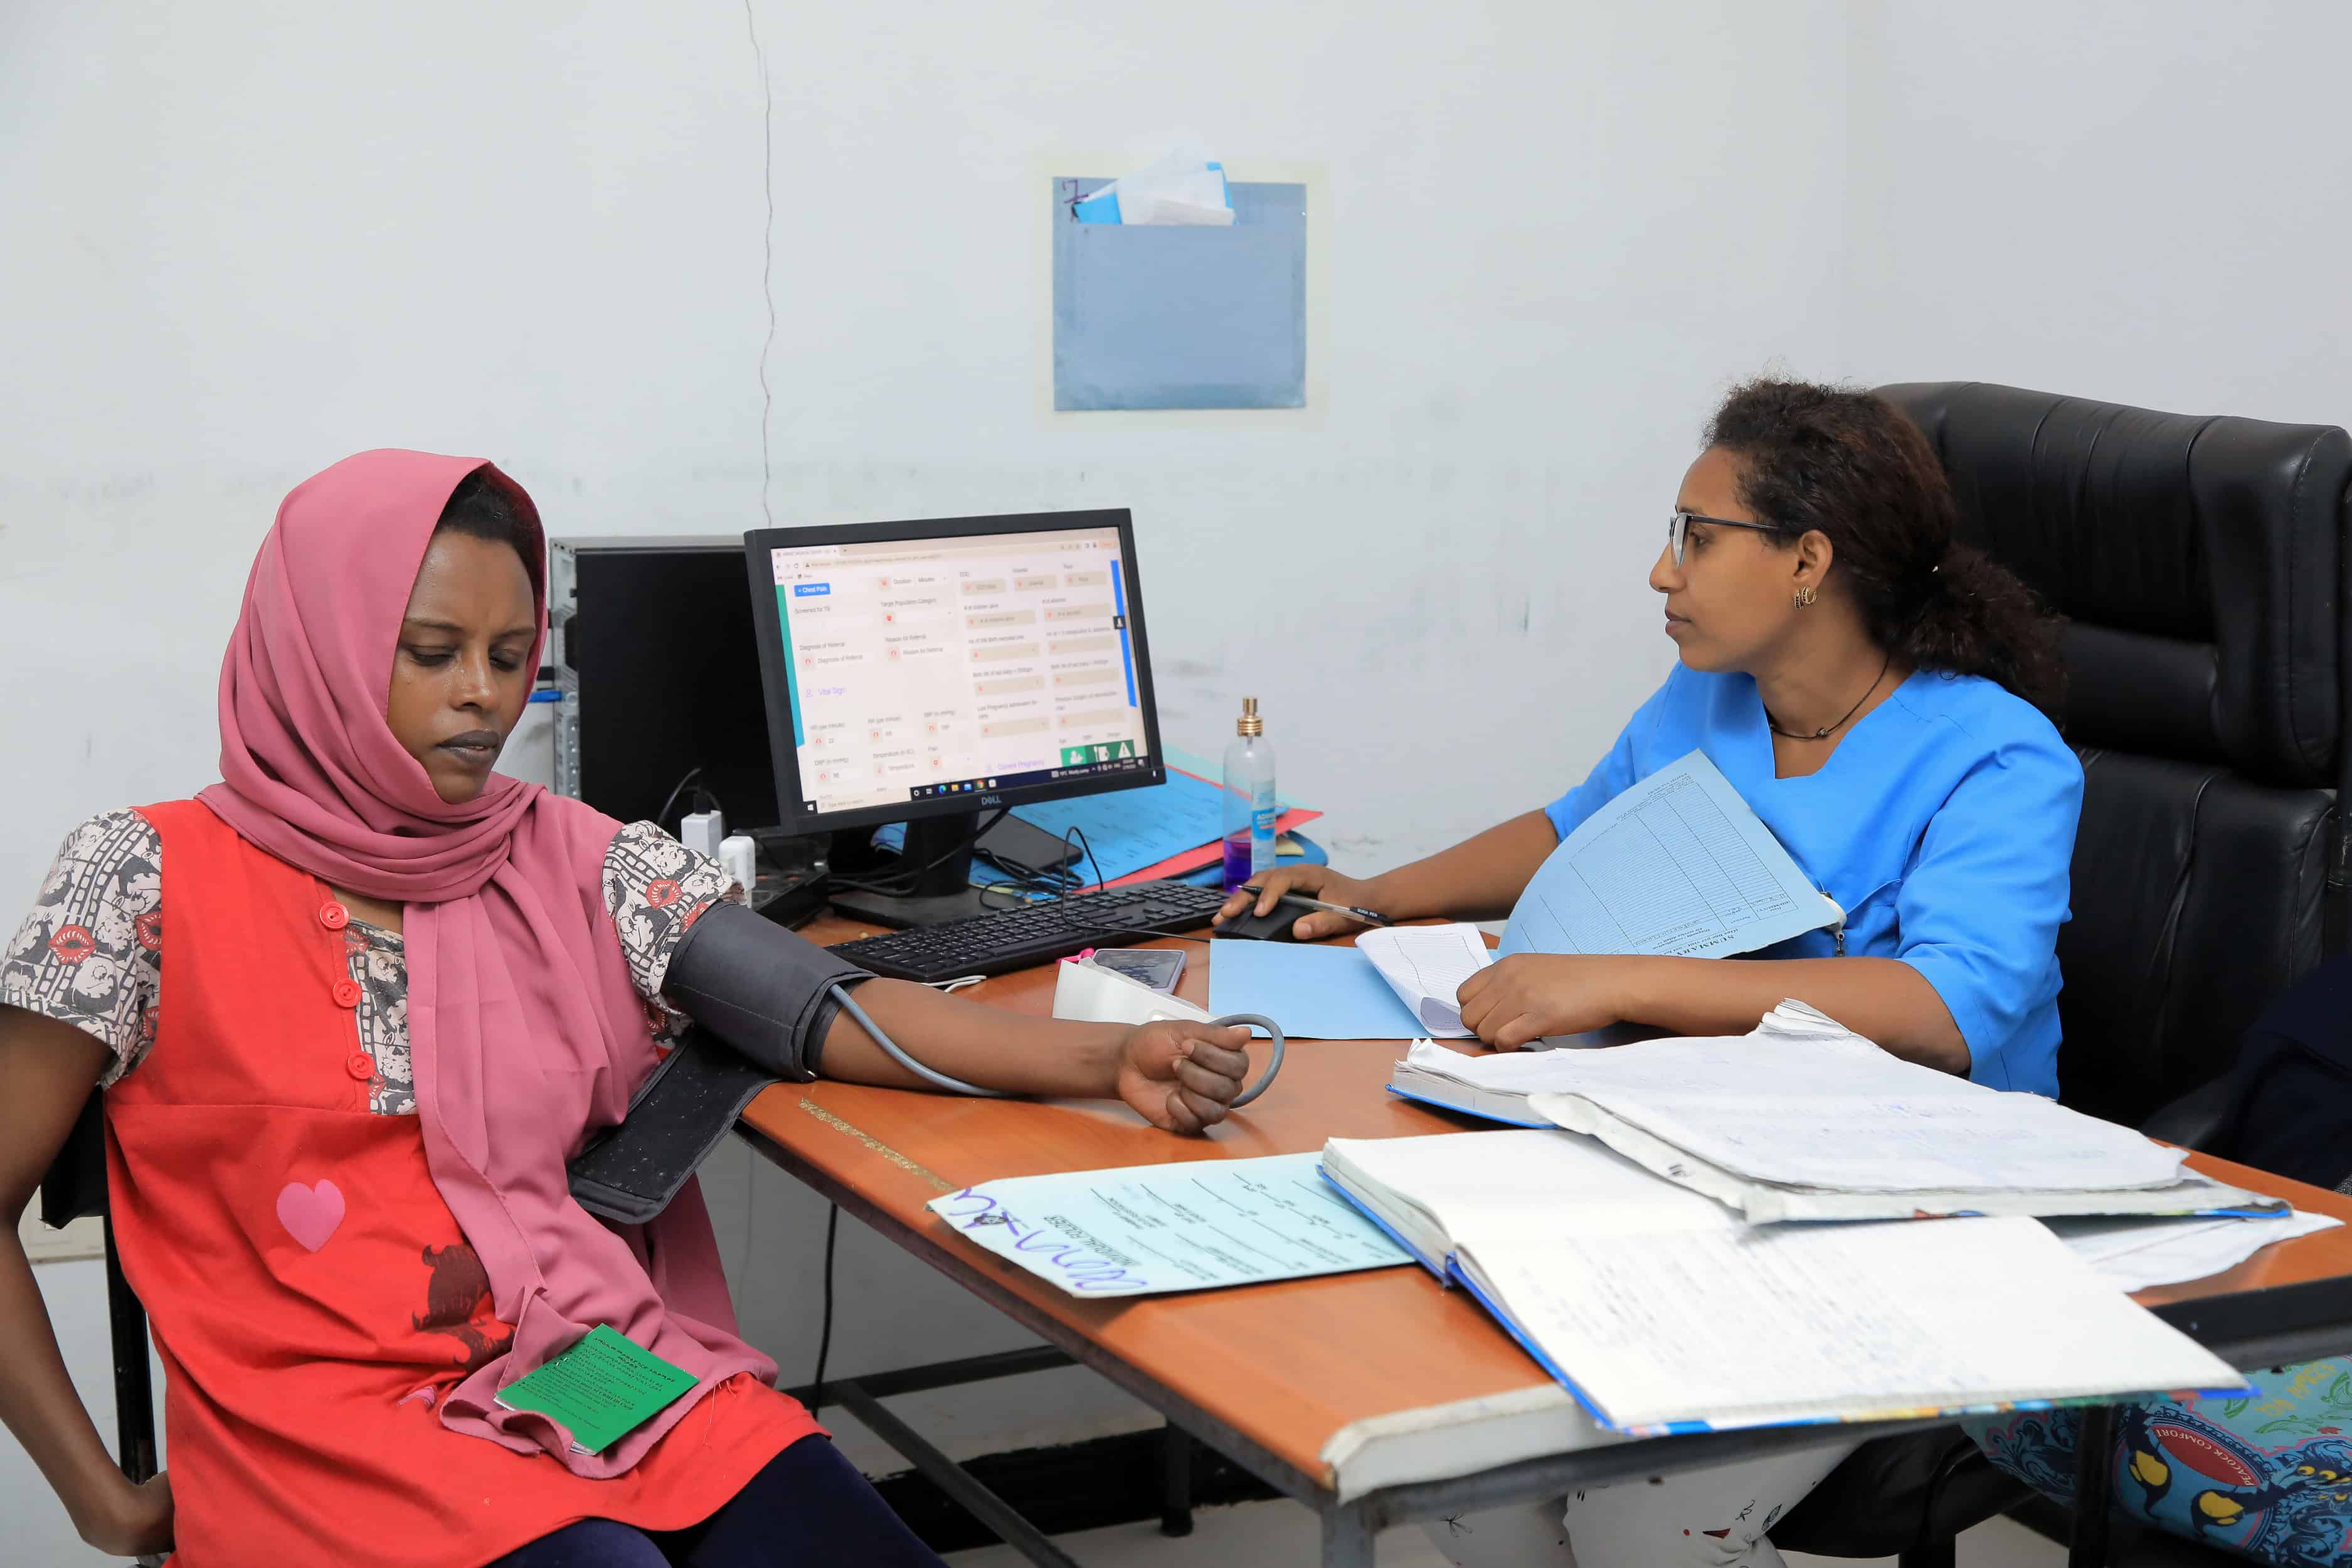 Health worker Amina Tariku examines a patient at the Abinet Health Center in Lideta Subcity, Addis Ababa.